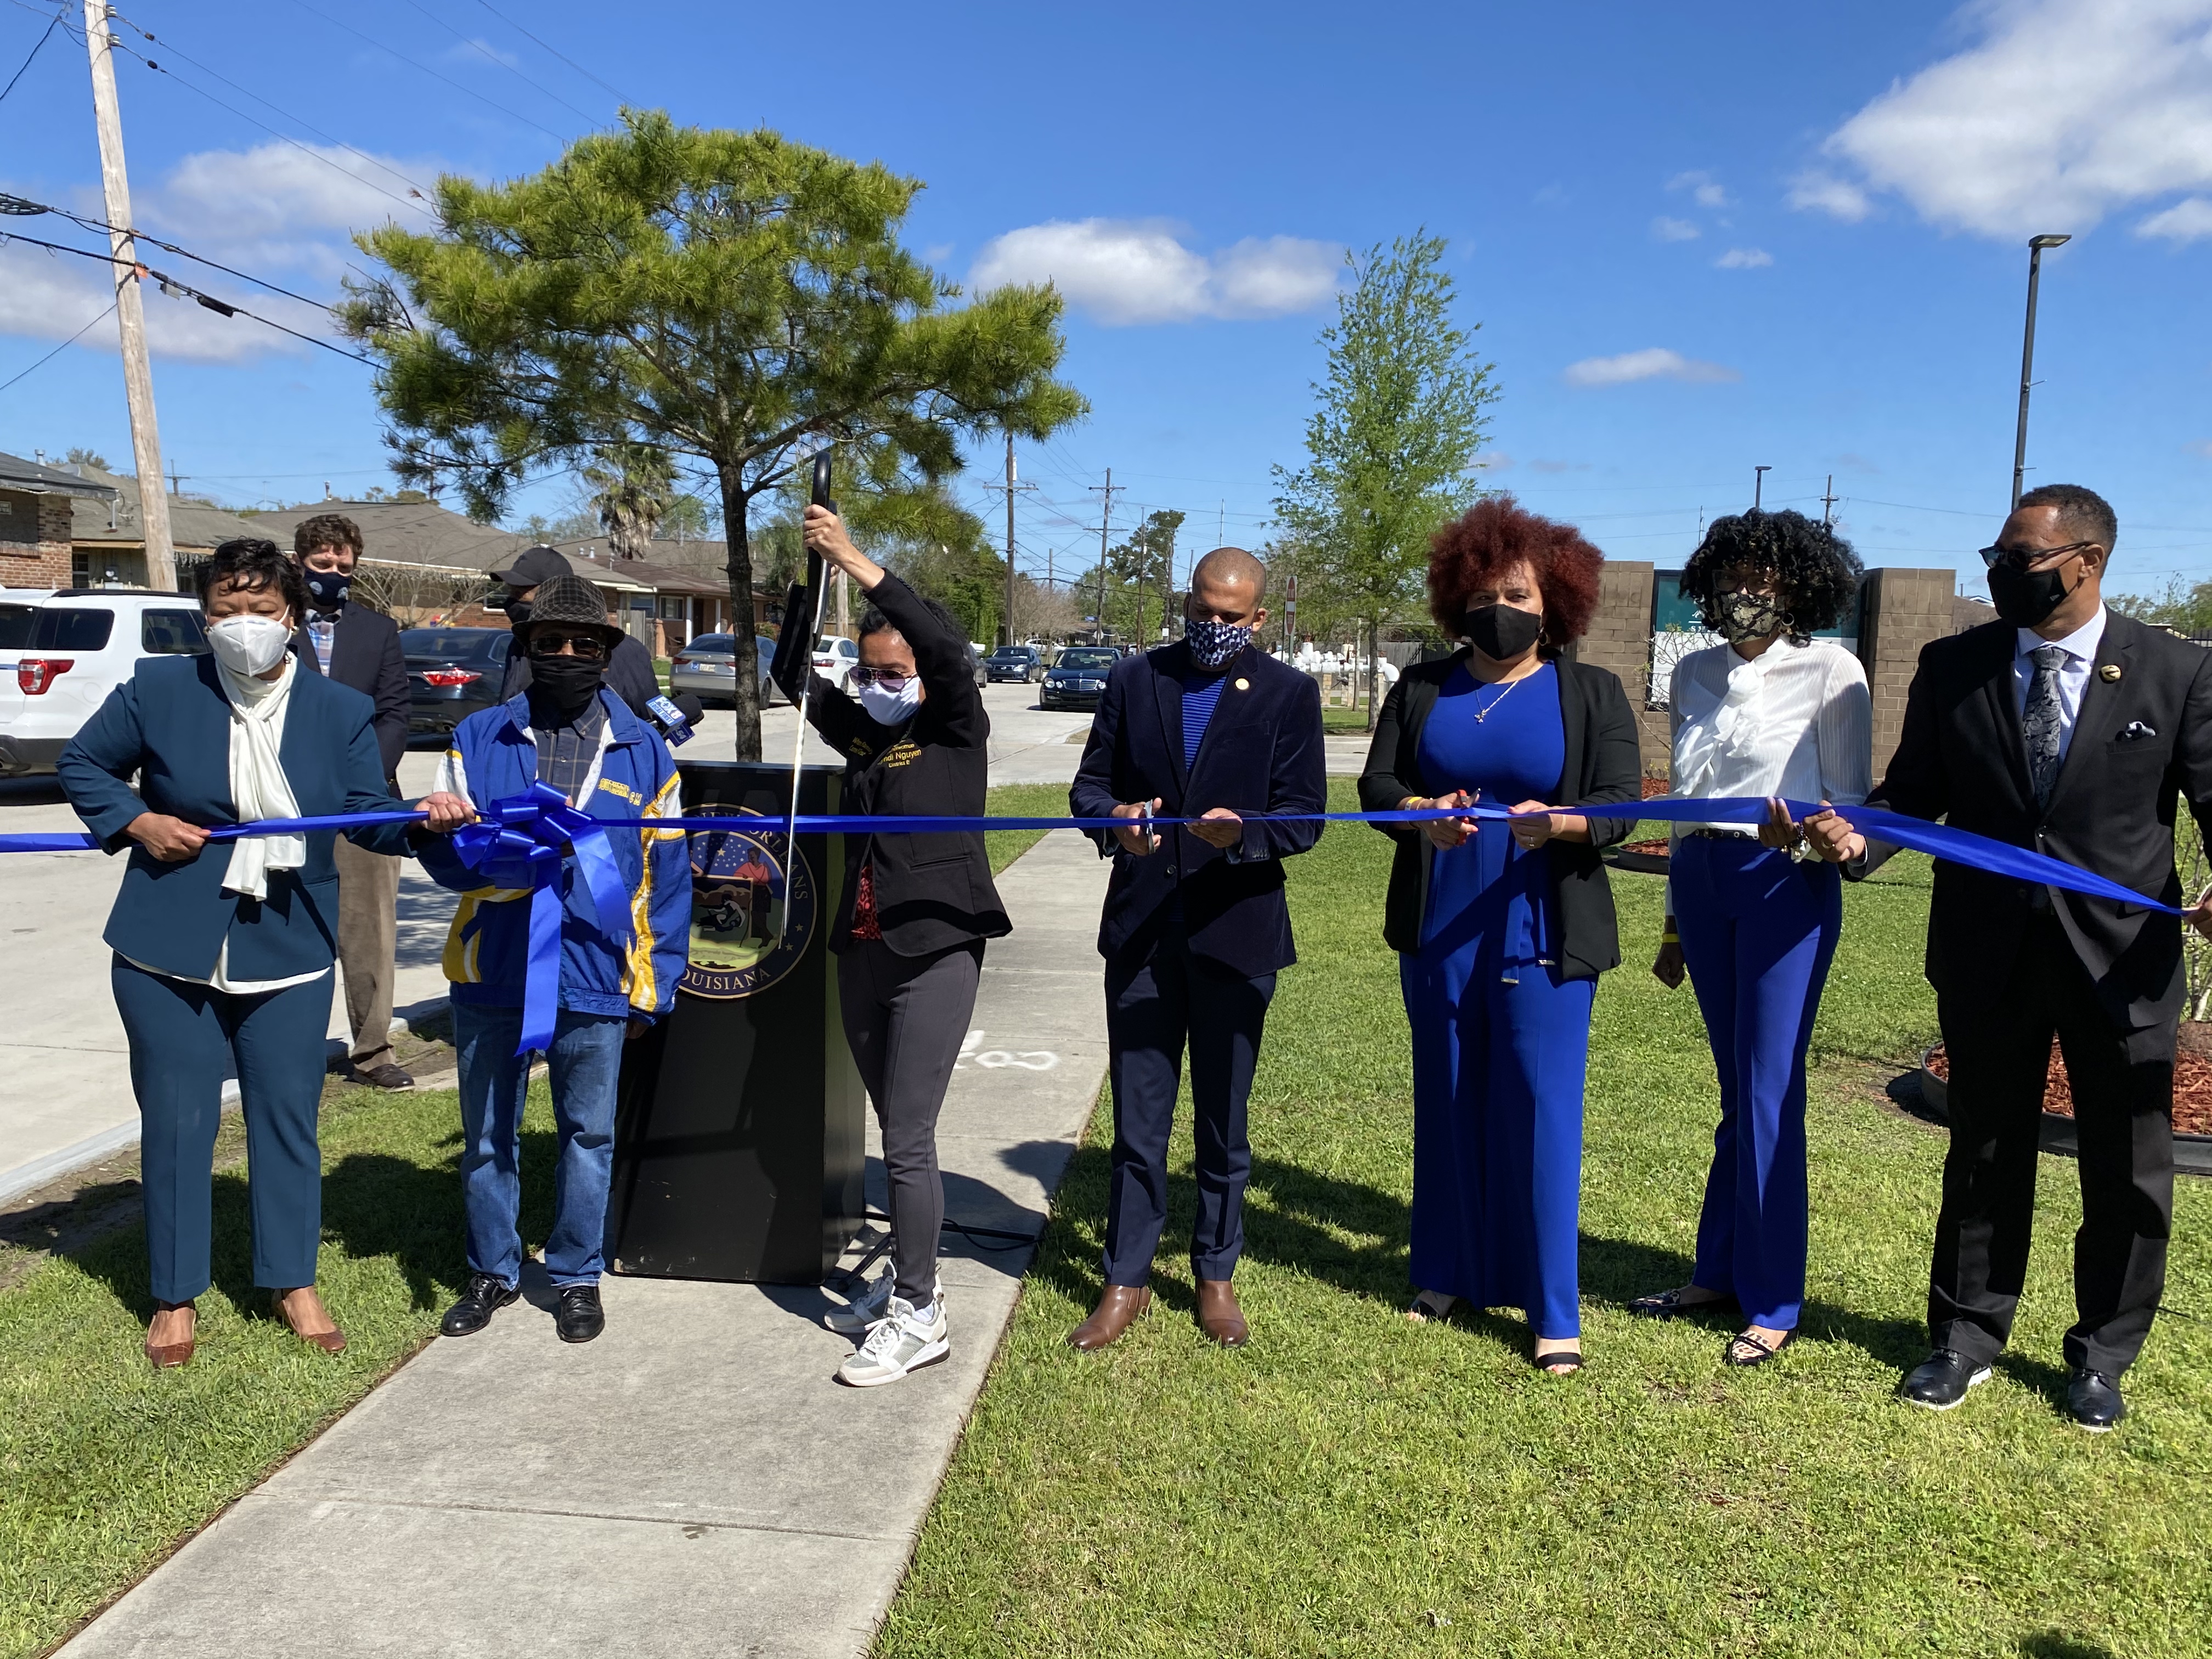 MAYOR CANTRELL JOINS OFFICIALS, COMMUNITY LEADERS TO CELEBRATE THE COMPLETION OF $13M READ BLVD. EAST ROADWORK PROJECTS